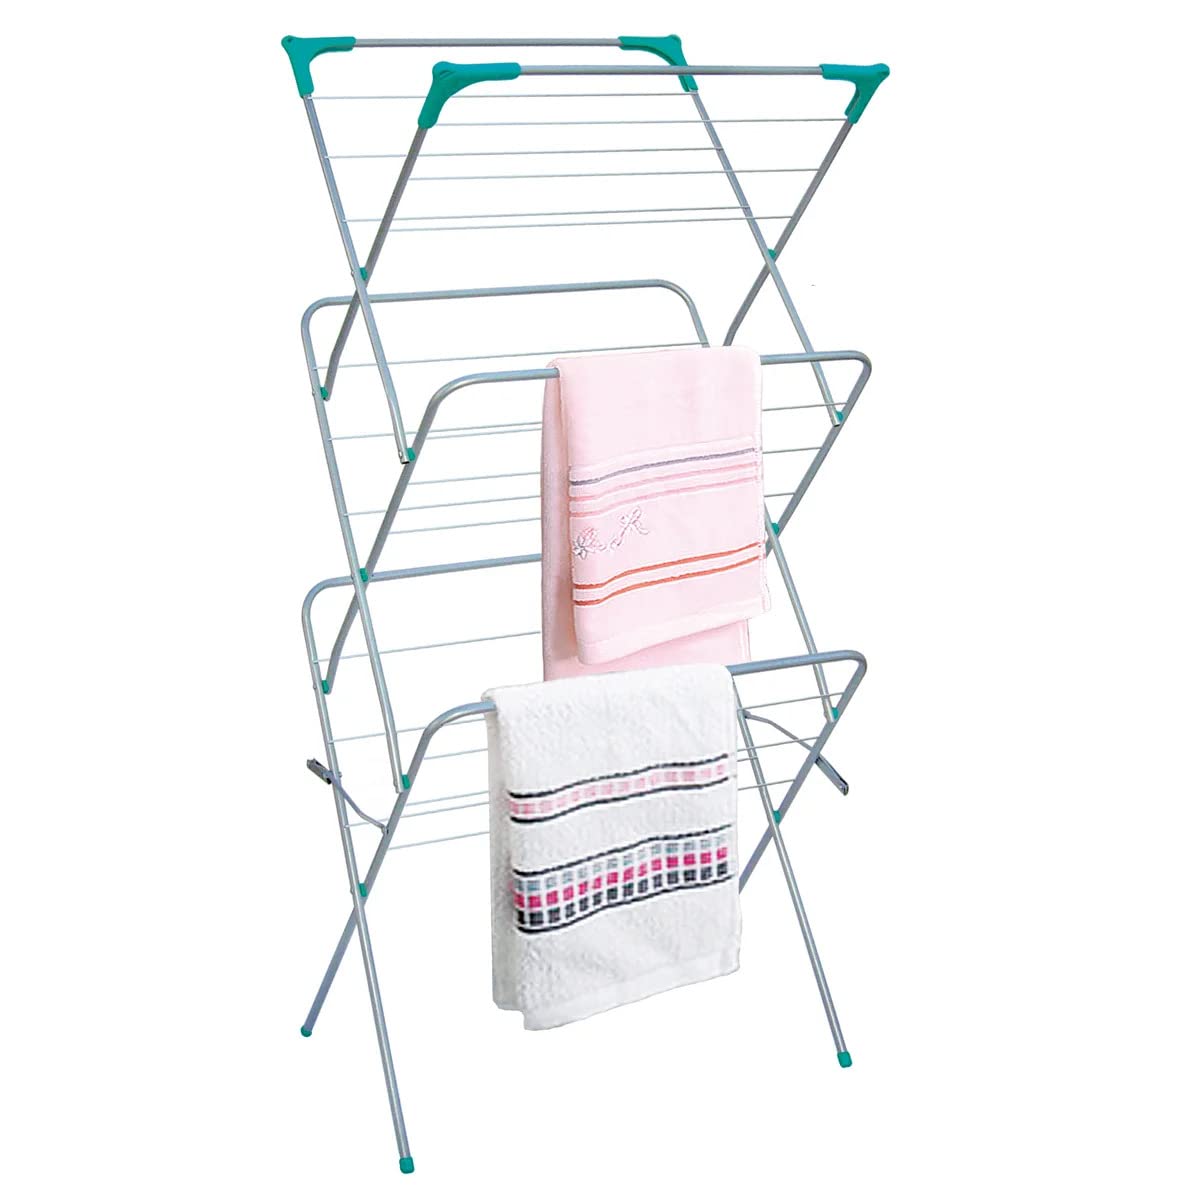 J&V TEXTILES Laundry Drying Rack for Clothes, Wood Clothing Dryer, Extreme Stability, Heavy Duty Built, Foldable, Collapsible Space Saving | Indoor-Outdoor Use - Pre-Assembled